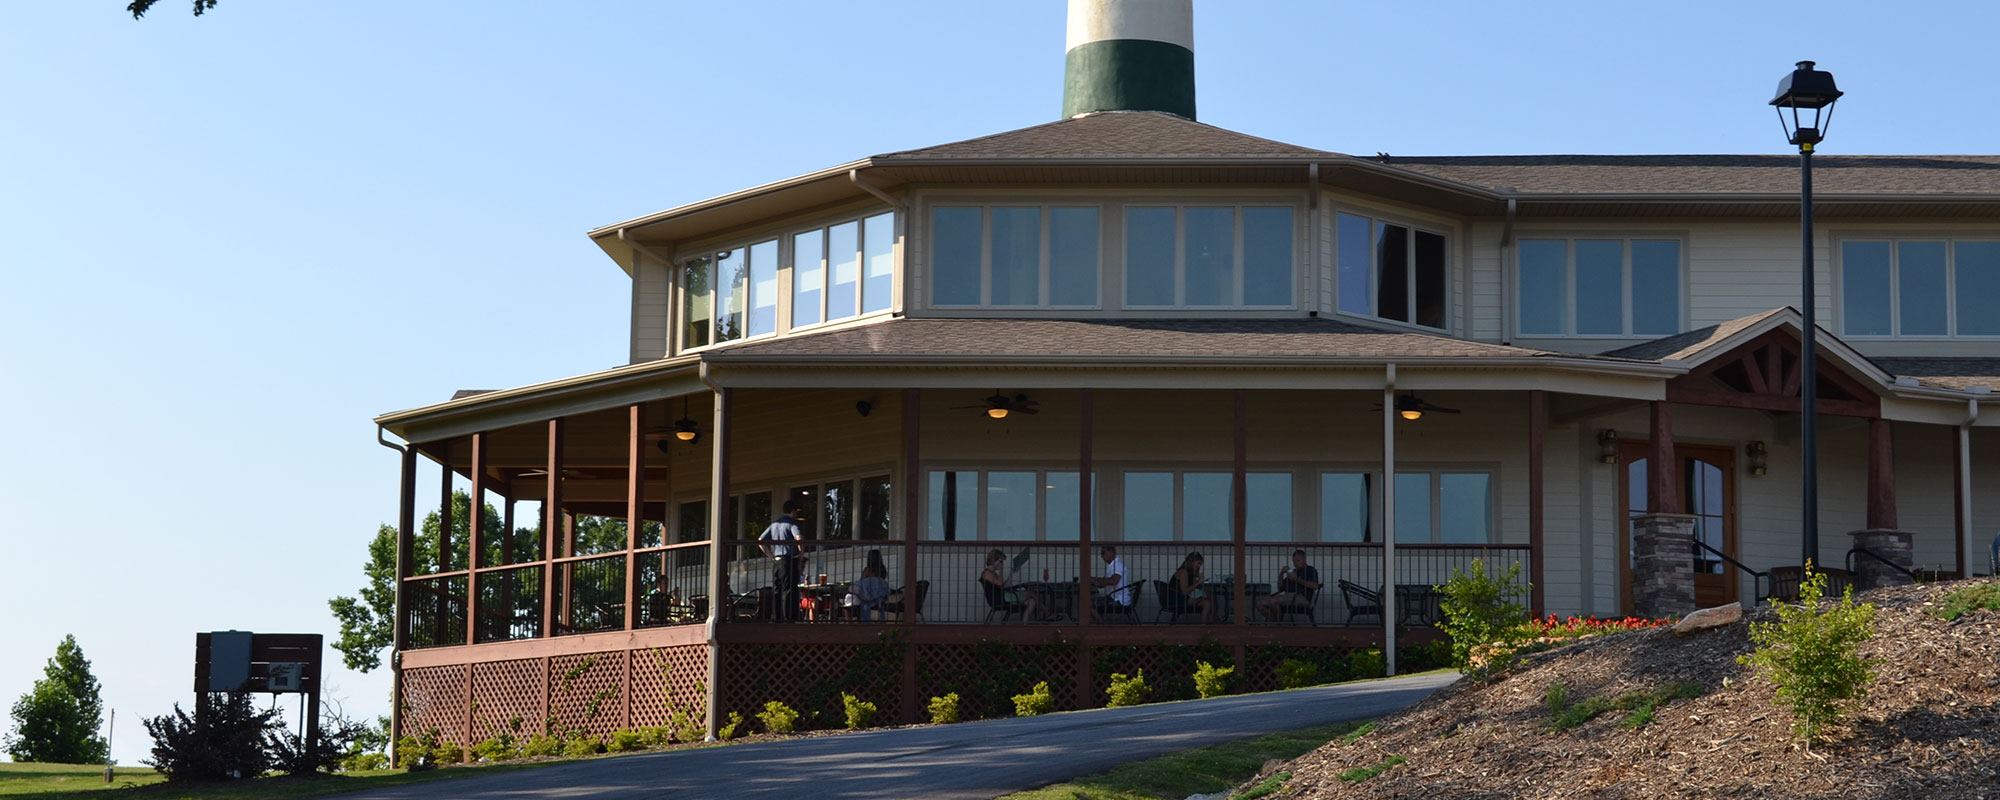 The Lighthouse Restaurant and Event Center - 7